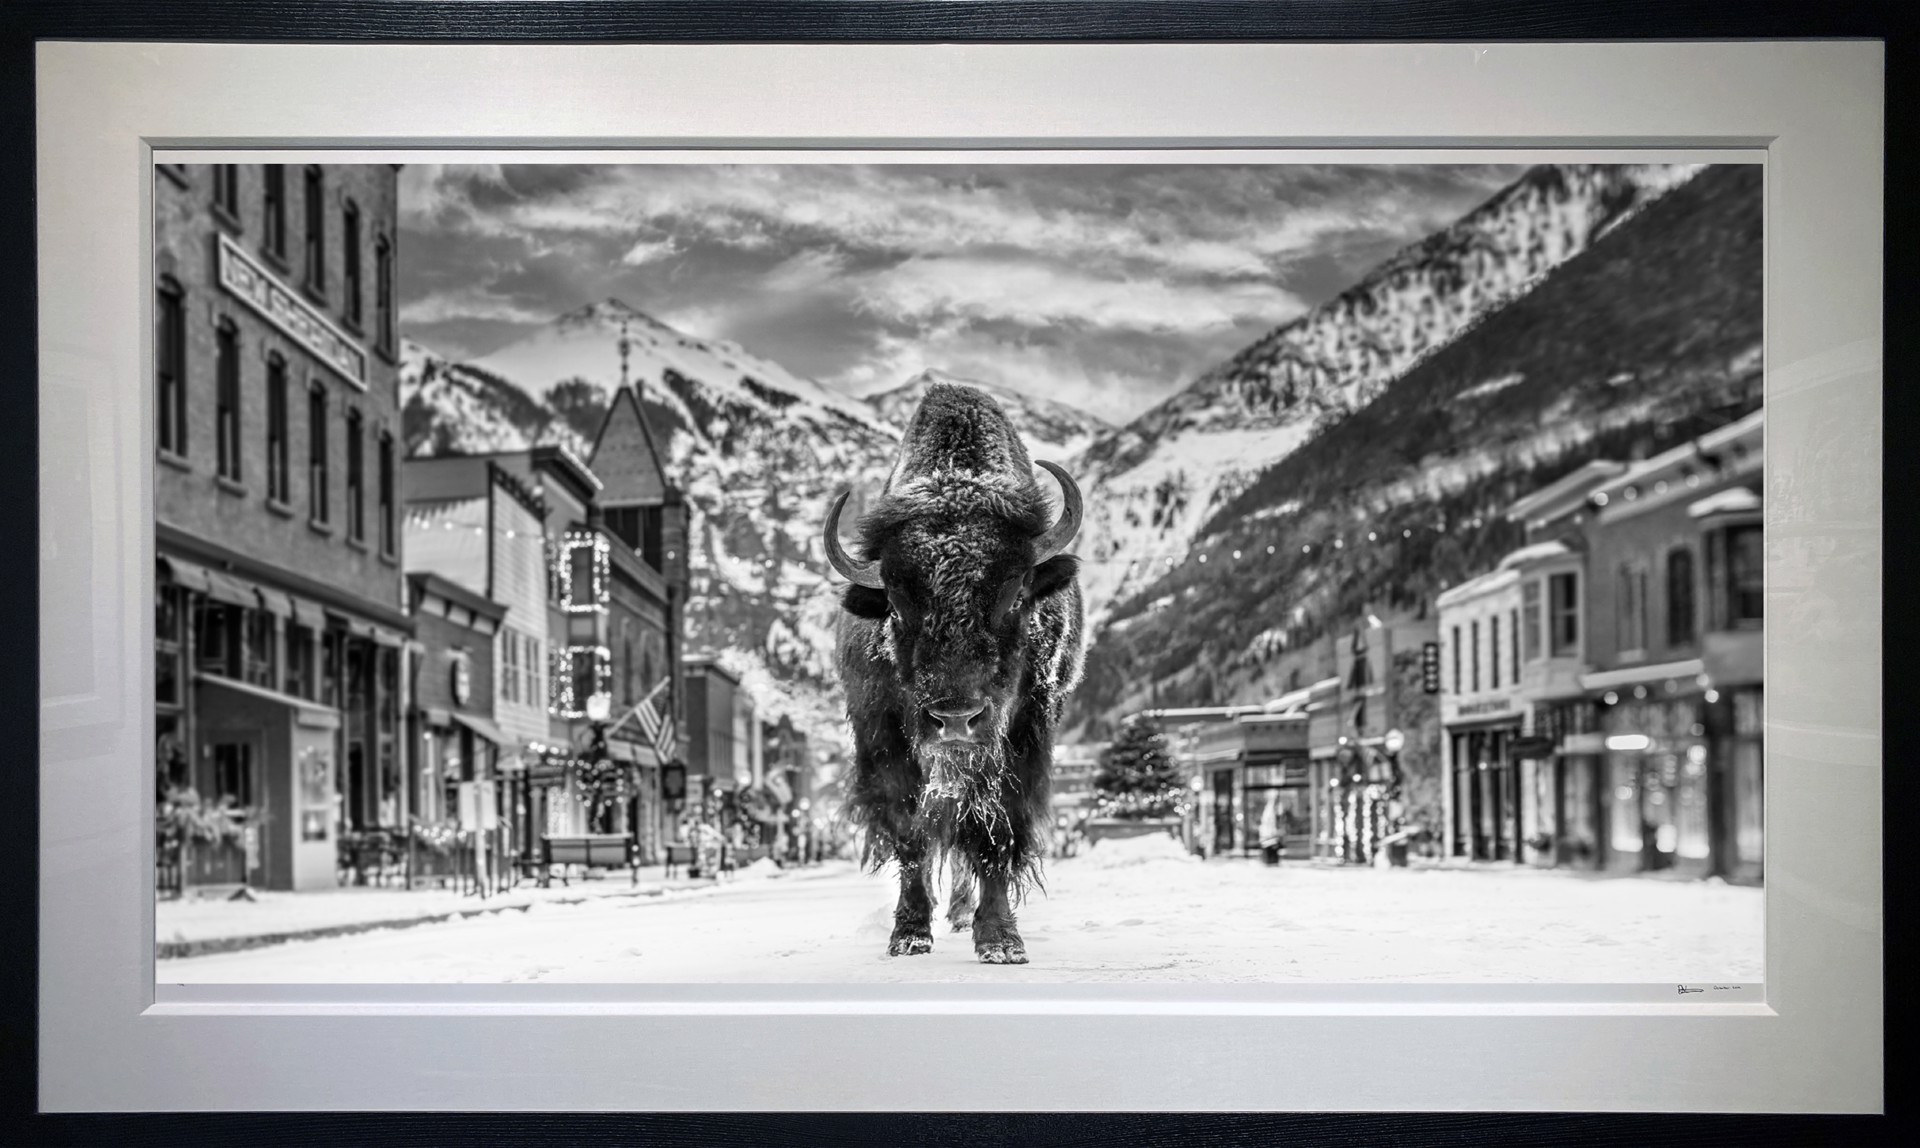 The Bison on Main by David Yarrow